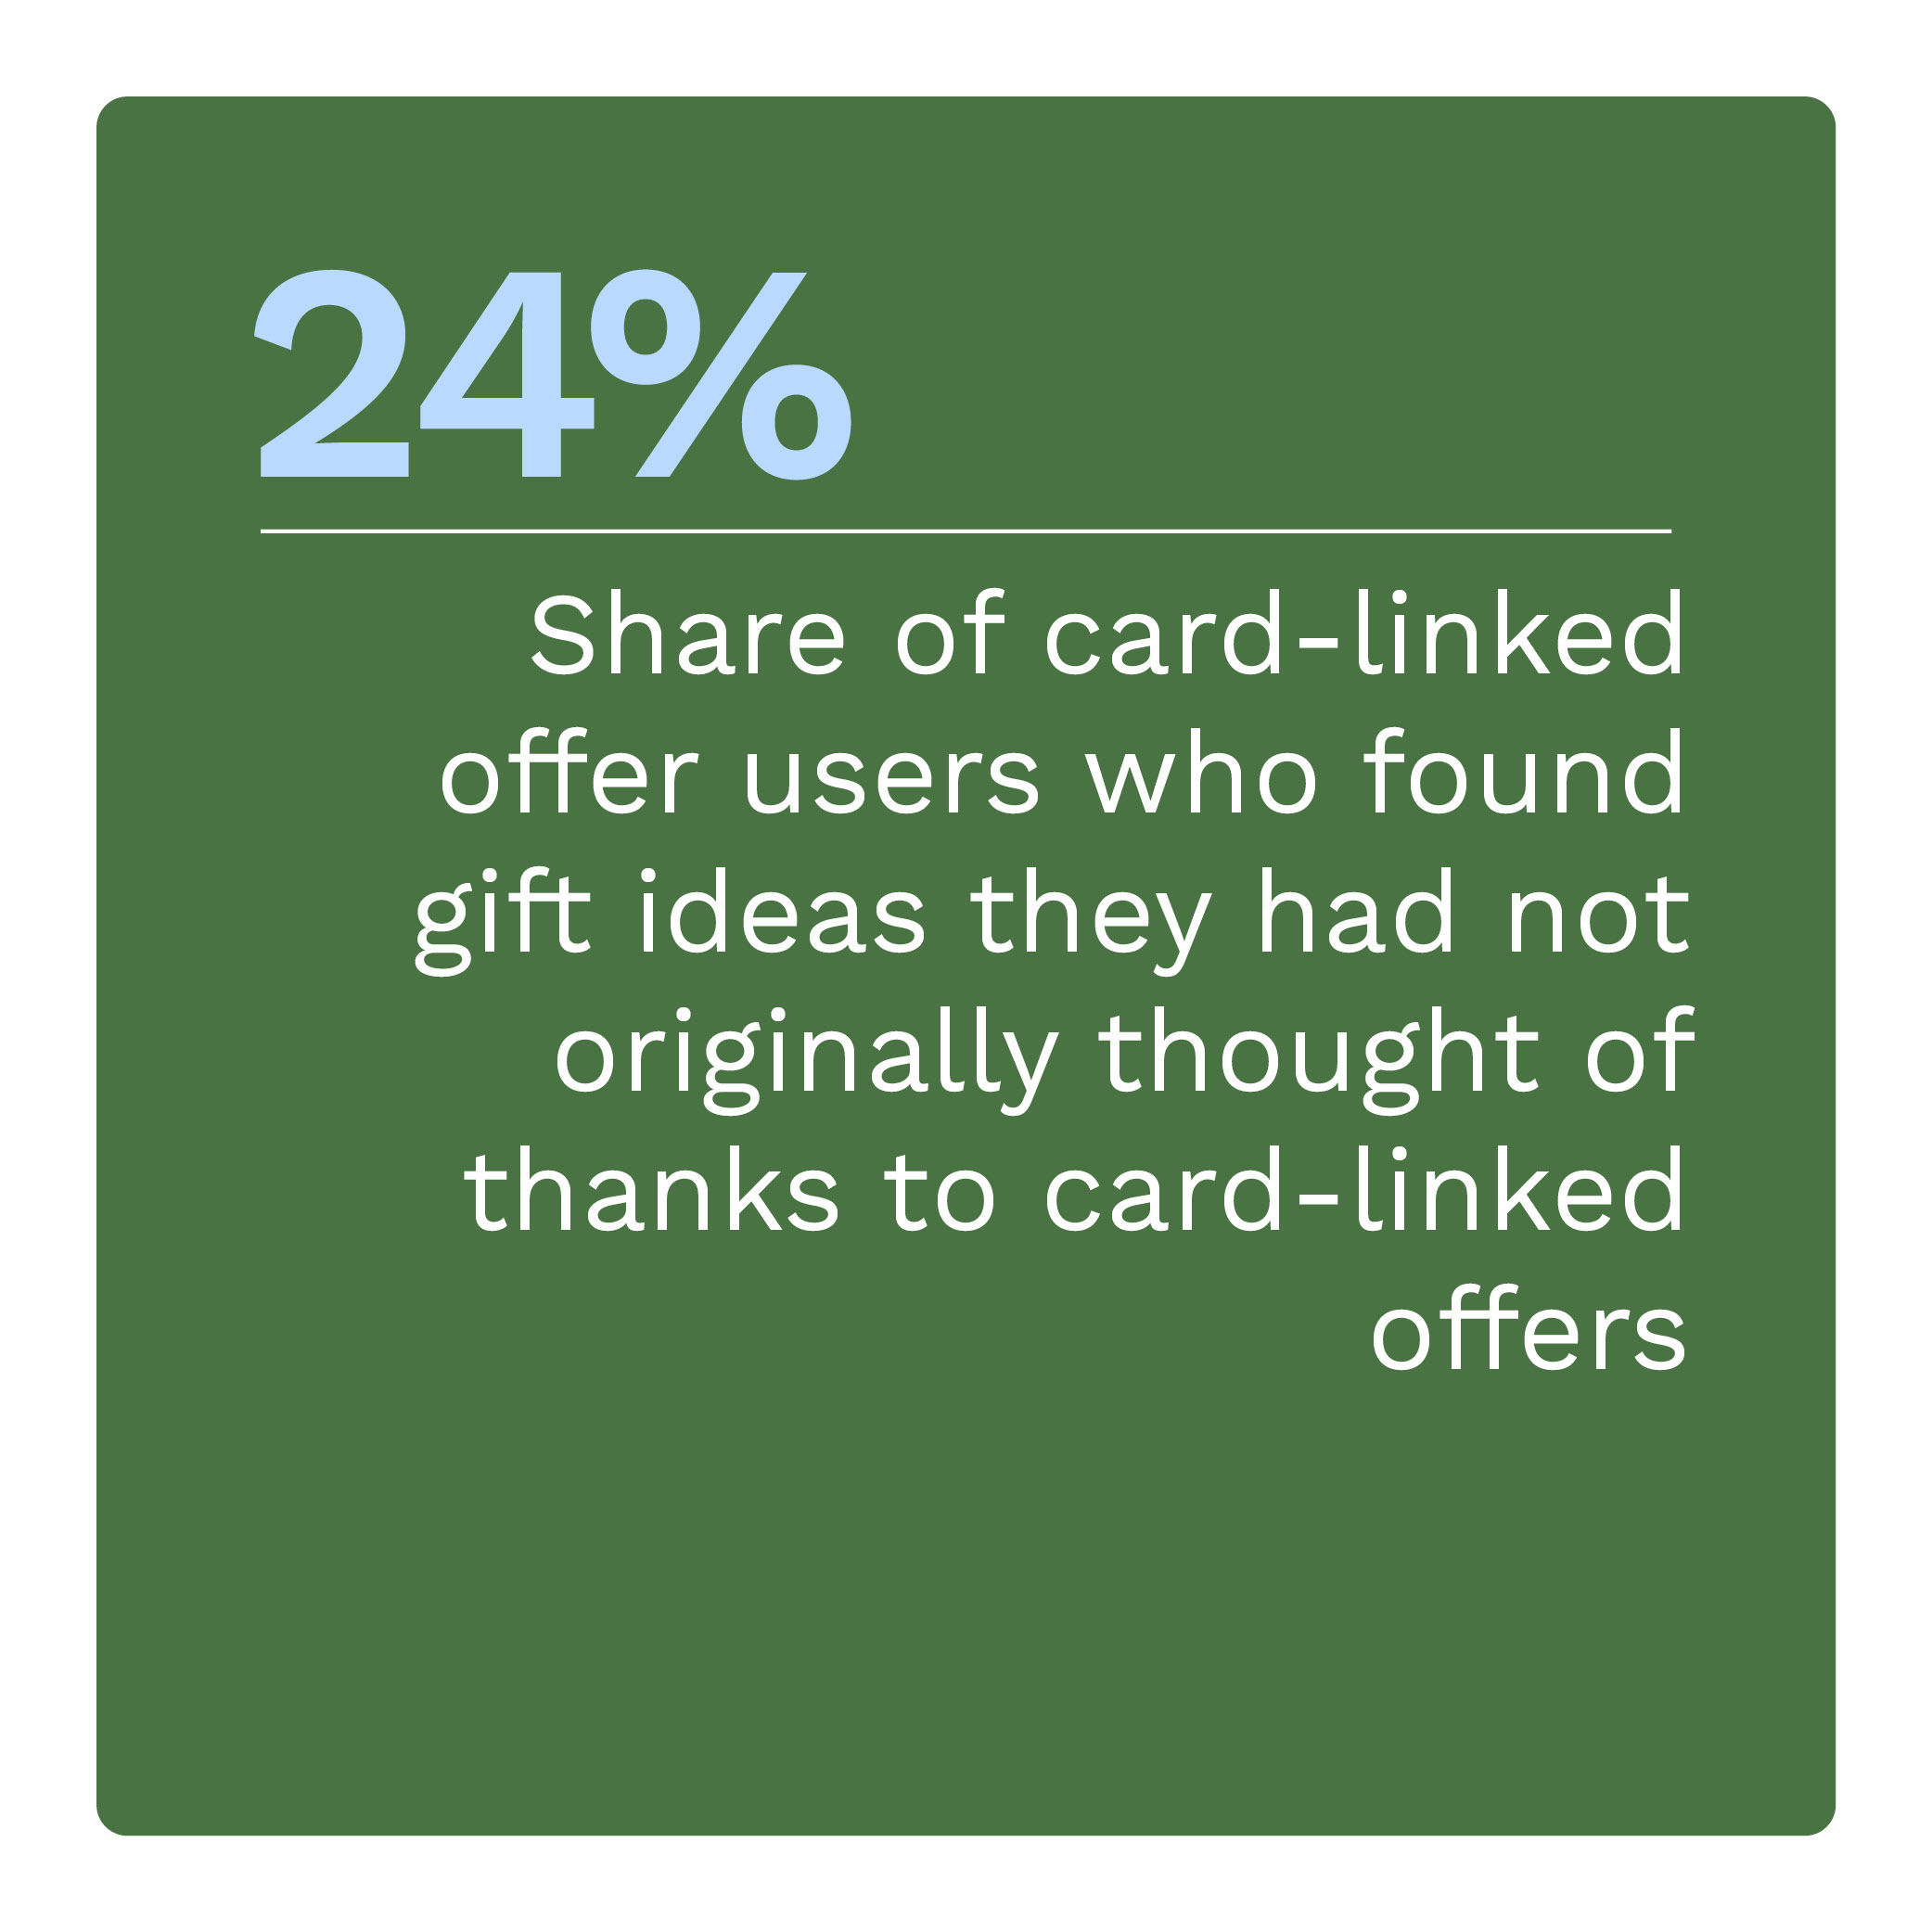 24%: Share of card-linked offer users who found gift ideas they had not originally thought of thanks to card-linked offers